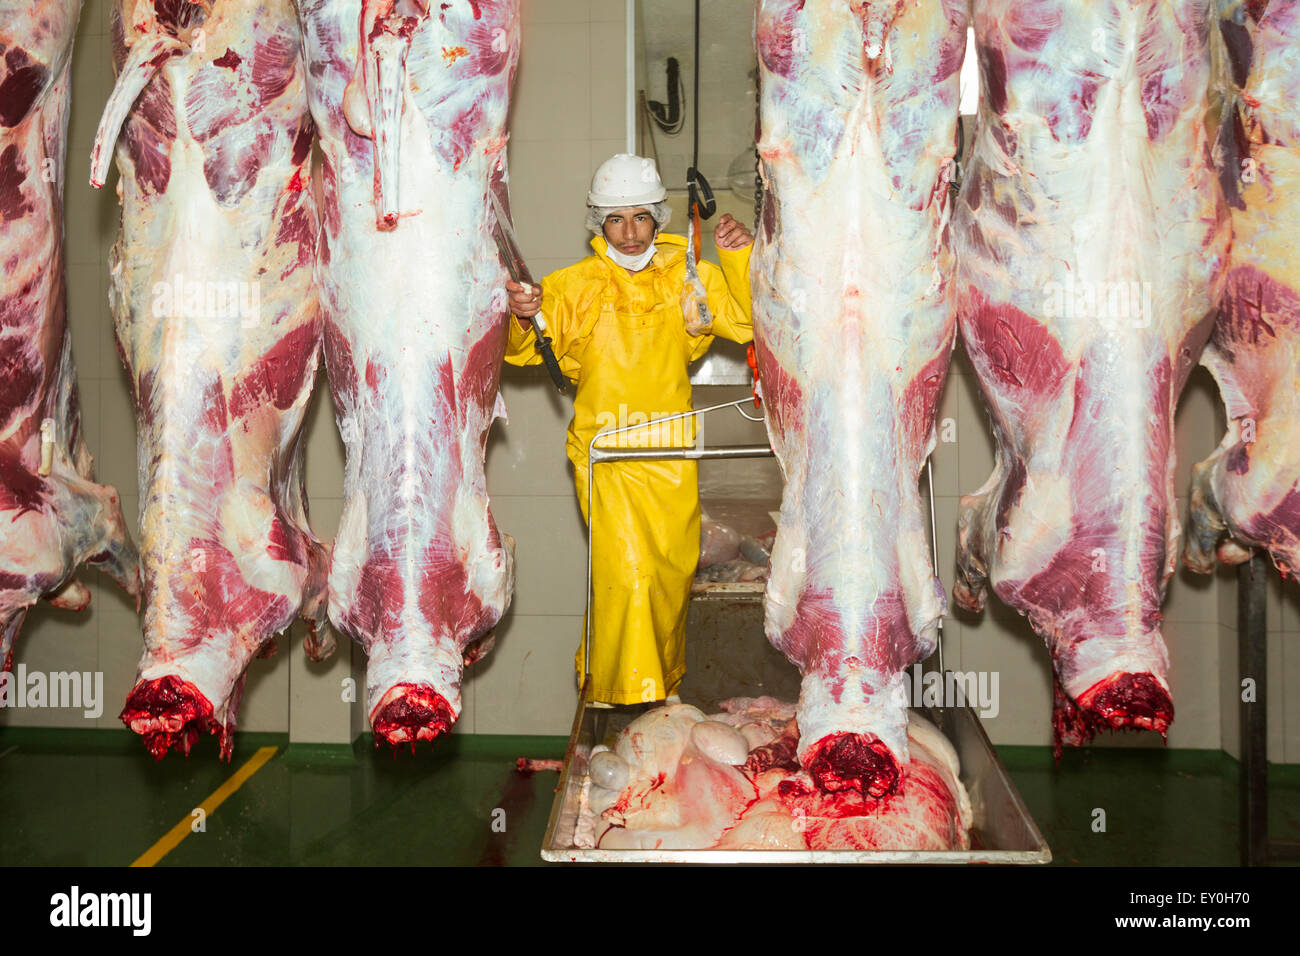 Butcher And Cow Carcasses On The Production Line Interior Of Slaughterhouse Stock Photo